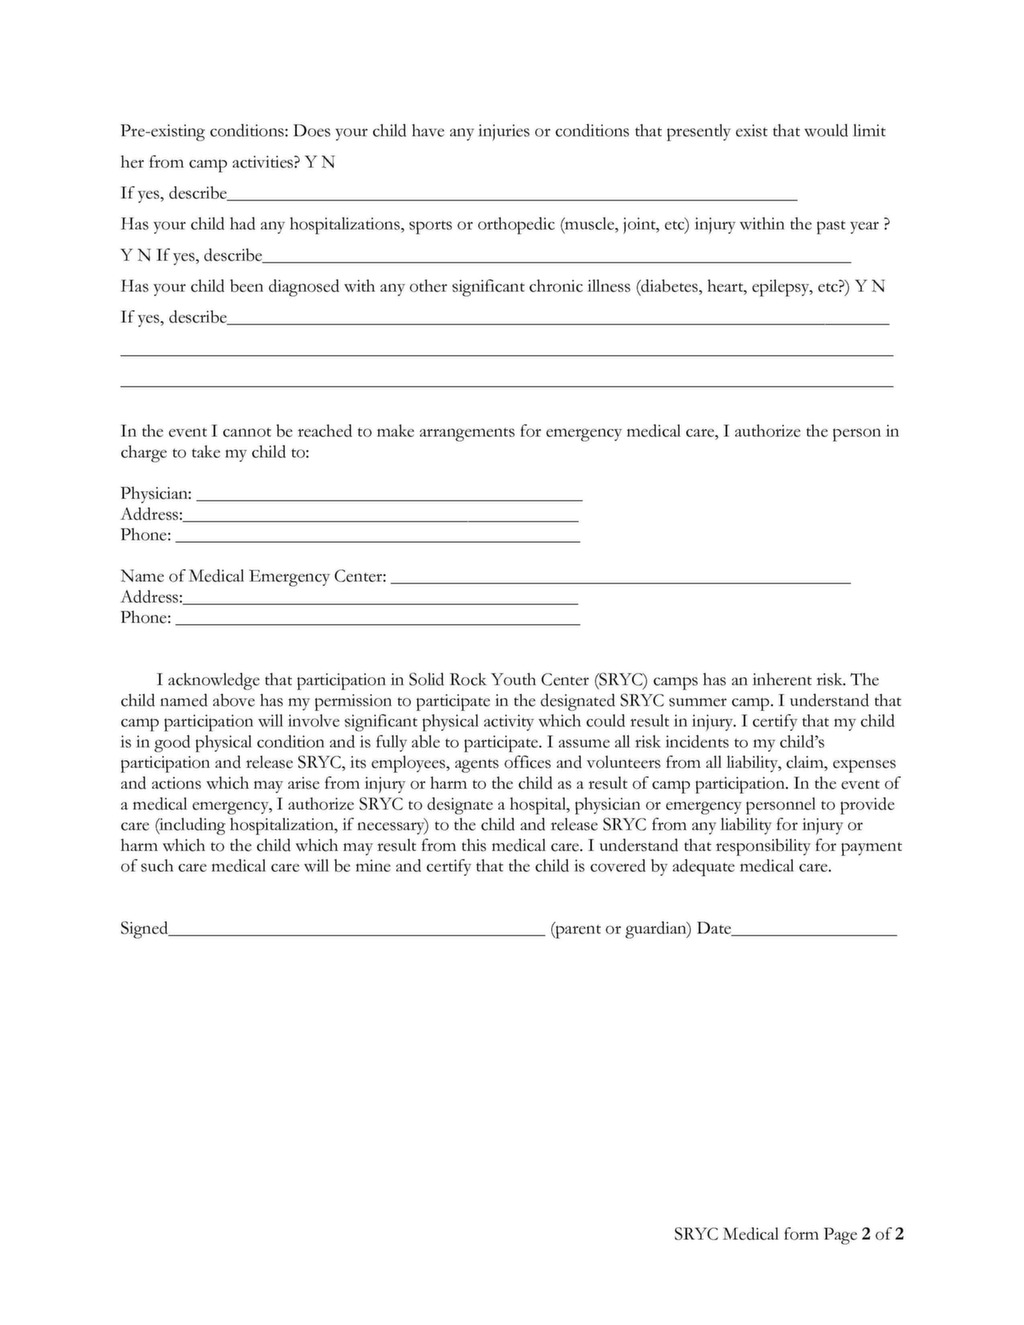 Medical Form for Summer Camp Solid Rock Youth Center